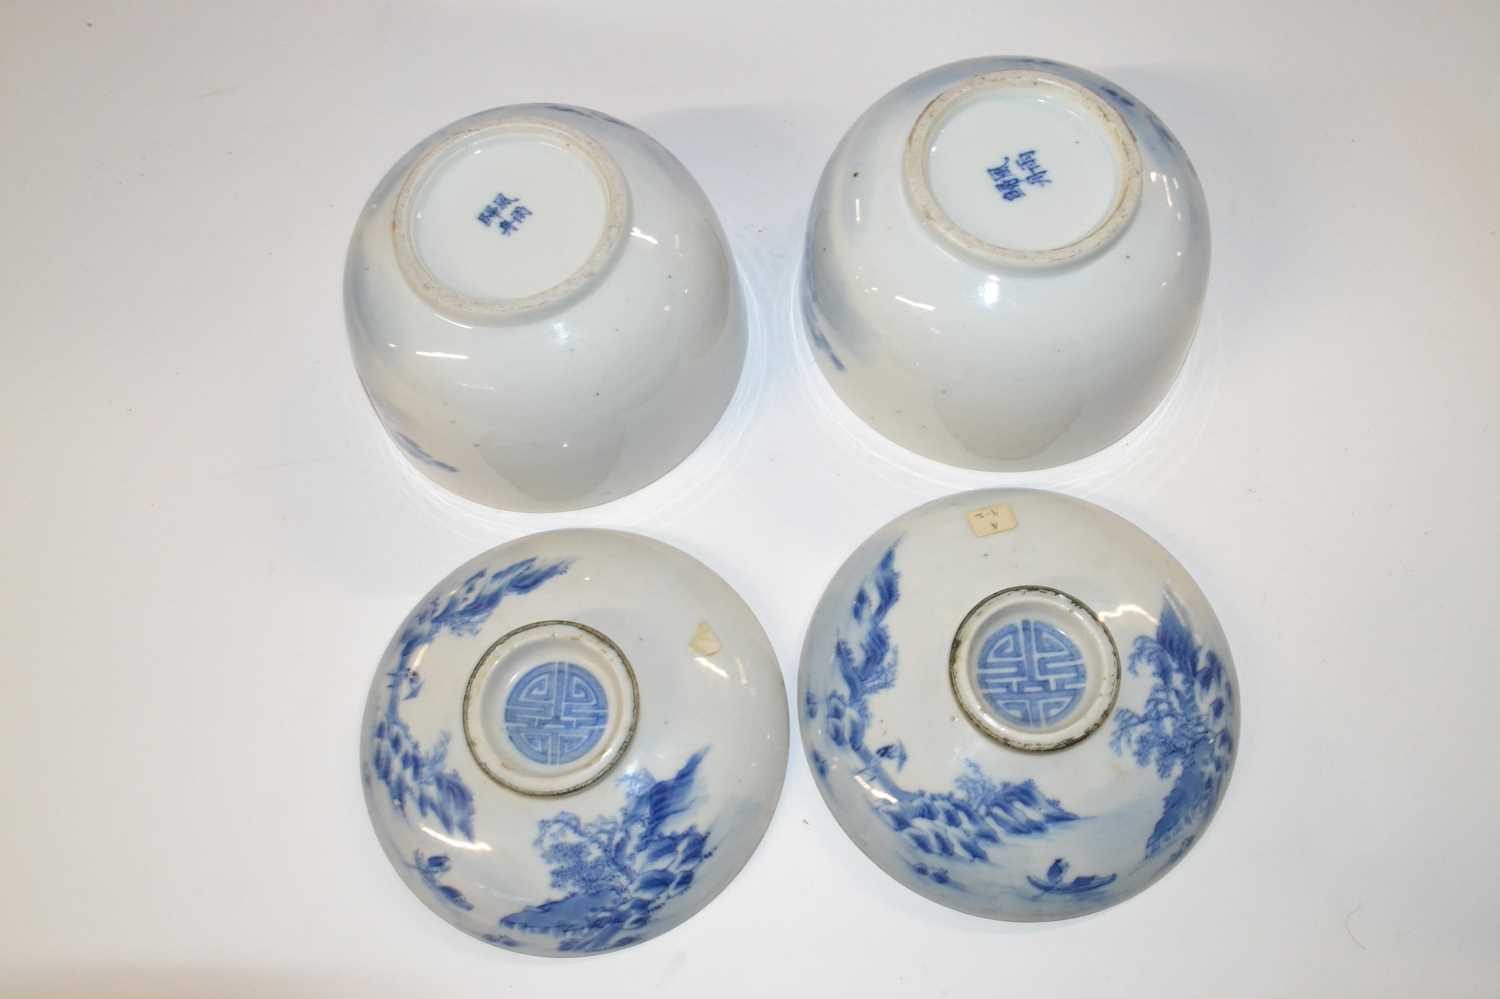 Two Oriental porcelain bowls and covers with blue and white designs, the covers with good luck - Image 4 of 5